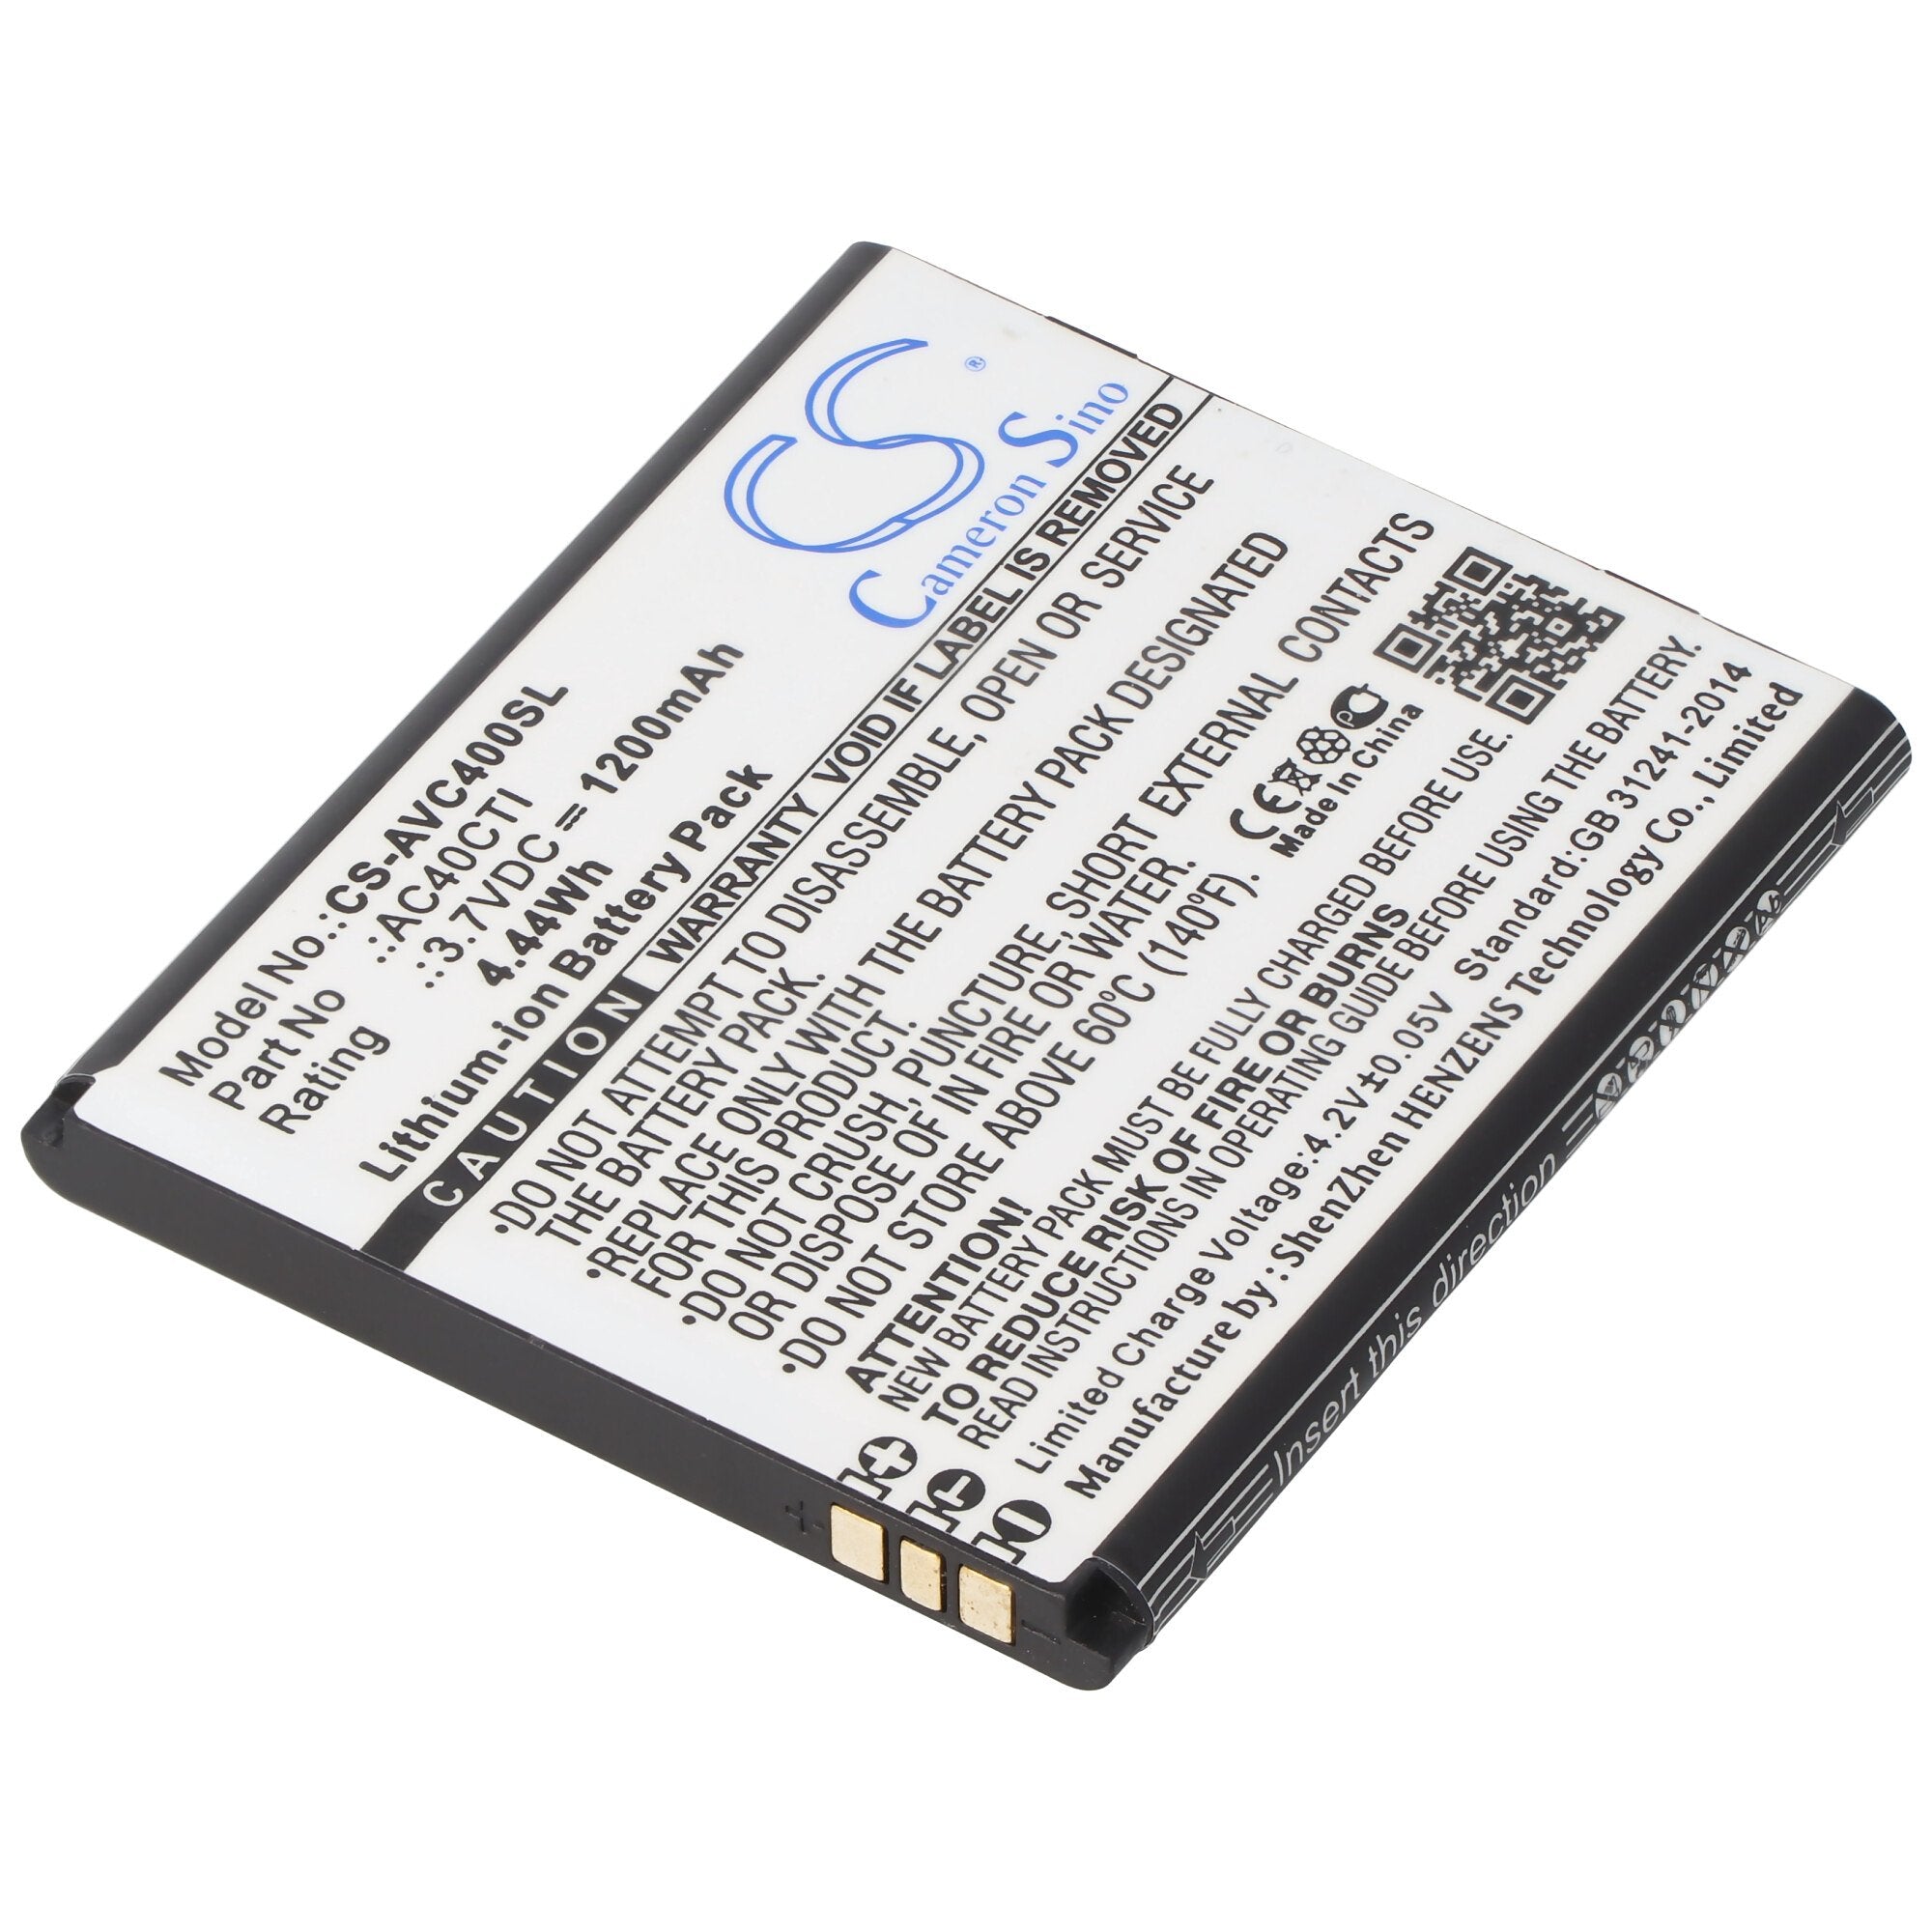 AC40CTI replica battery only suitable for the Archos AC40CTI battery